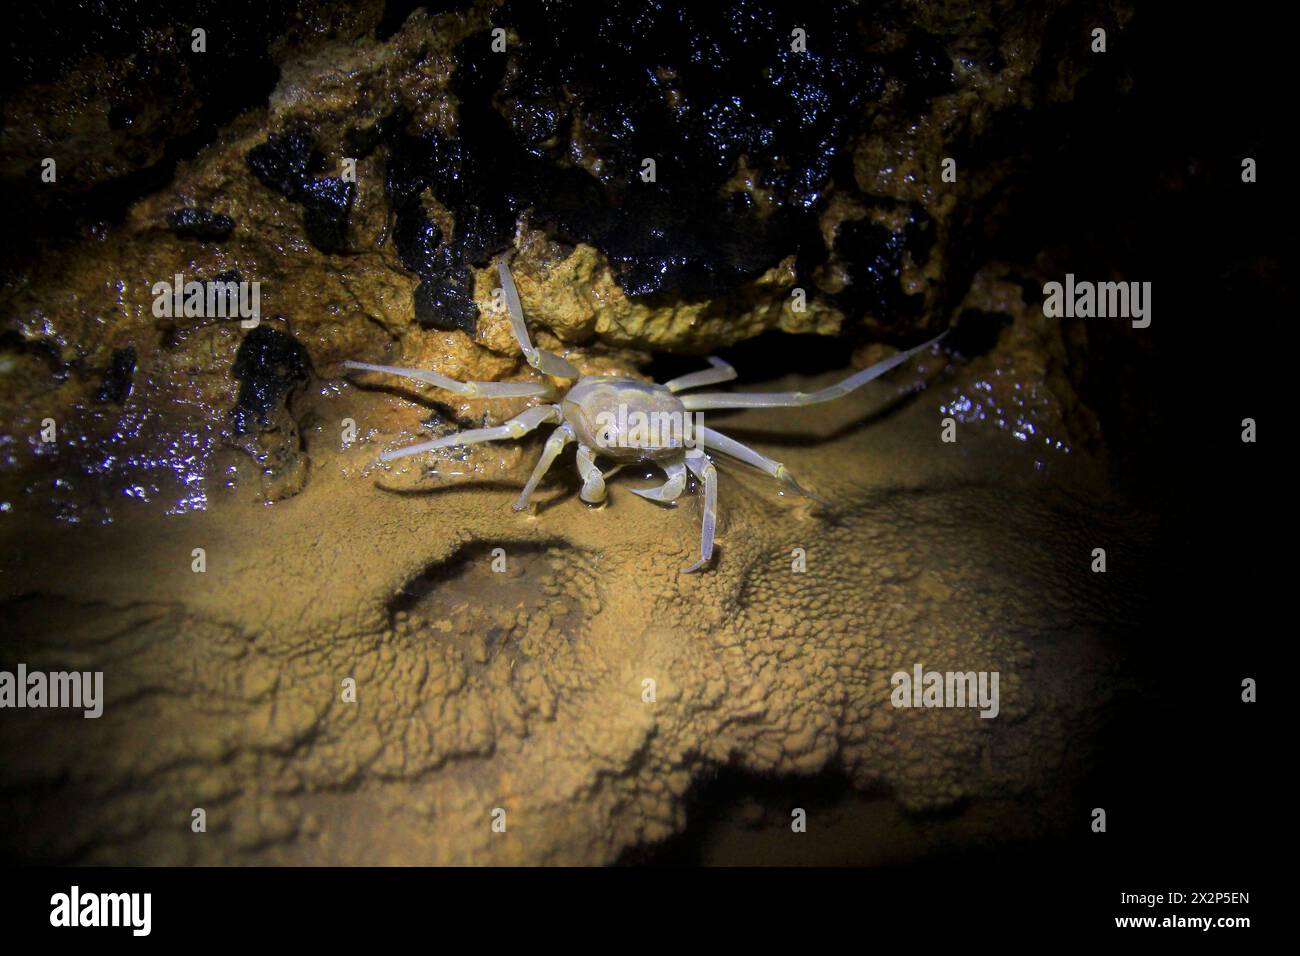 Sesarmoides Jacobsoni, a cave biota that lives in the Karst area of Gunung Sewu. This type of crab was first discovered by Edward Jacobson in 1911. Stock Photo